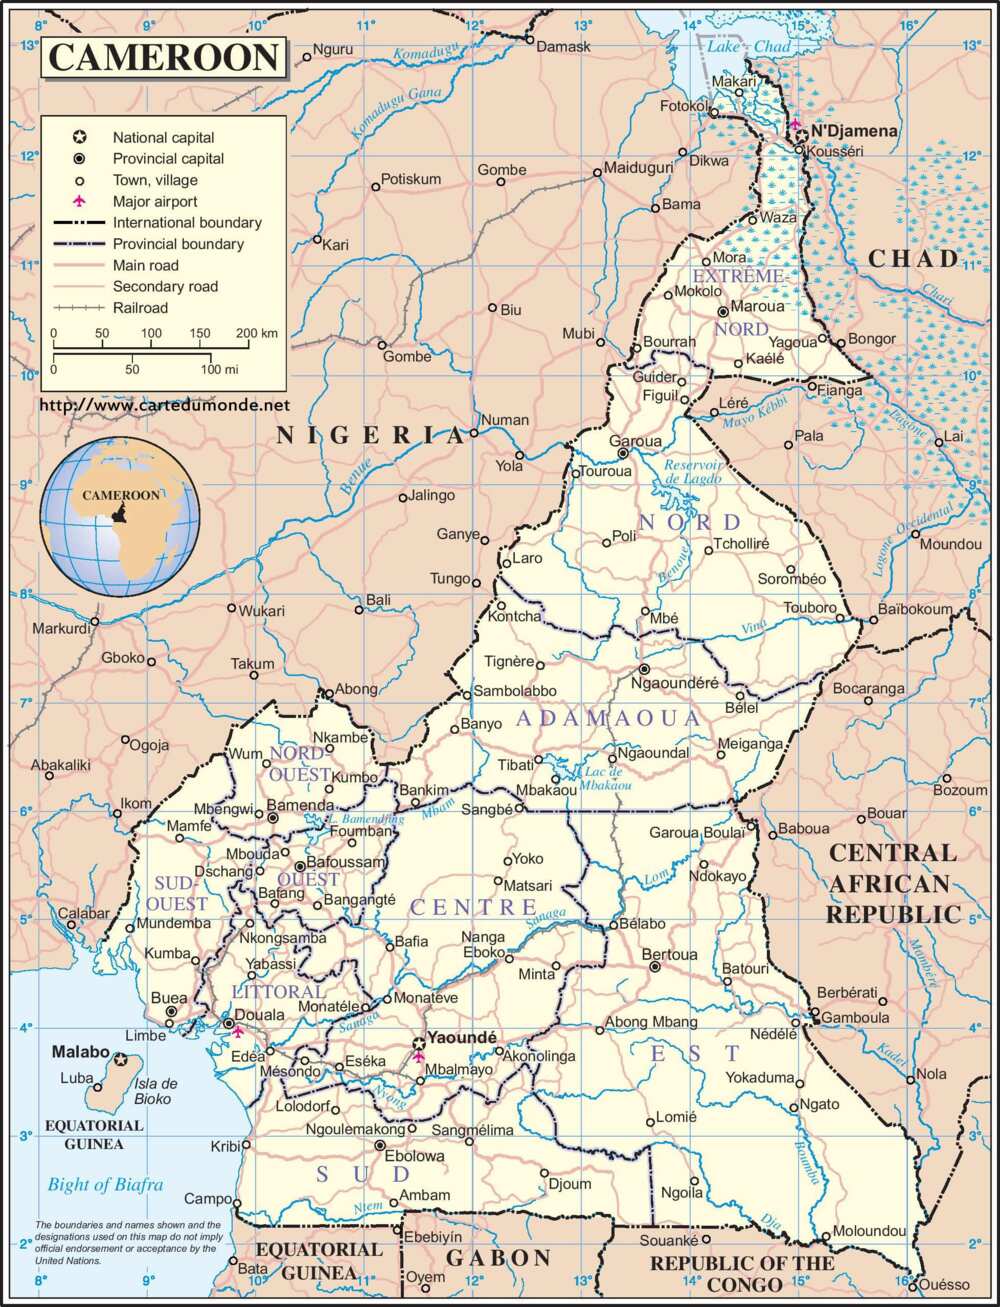 Cameroon state